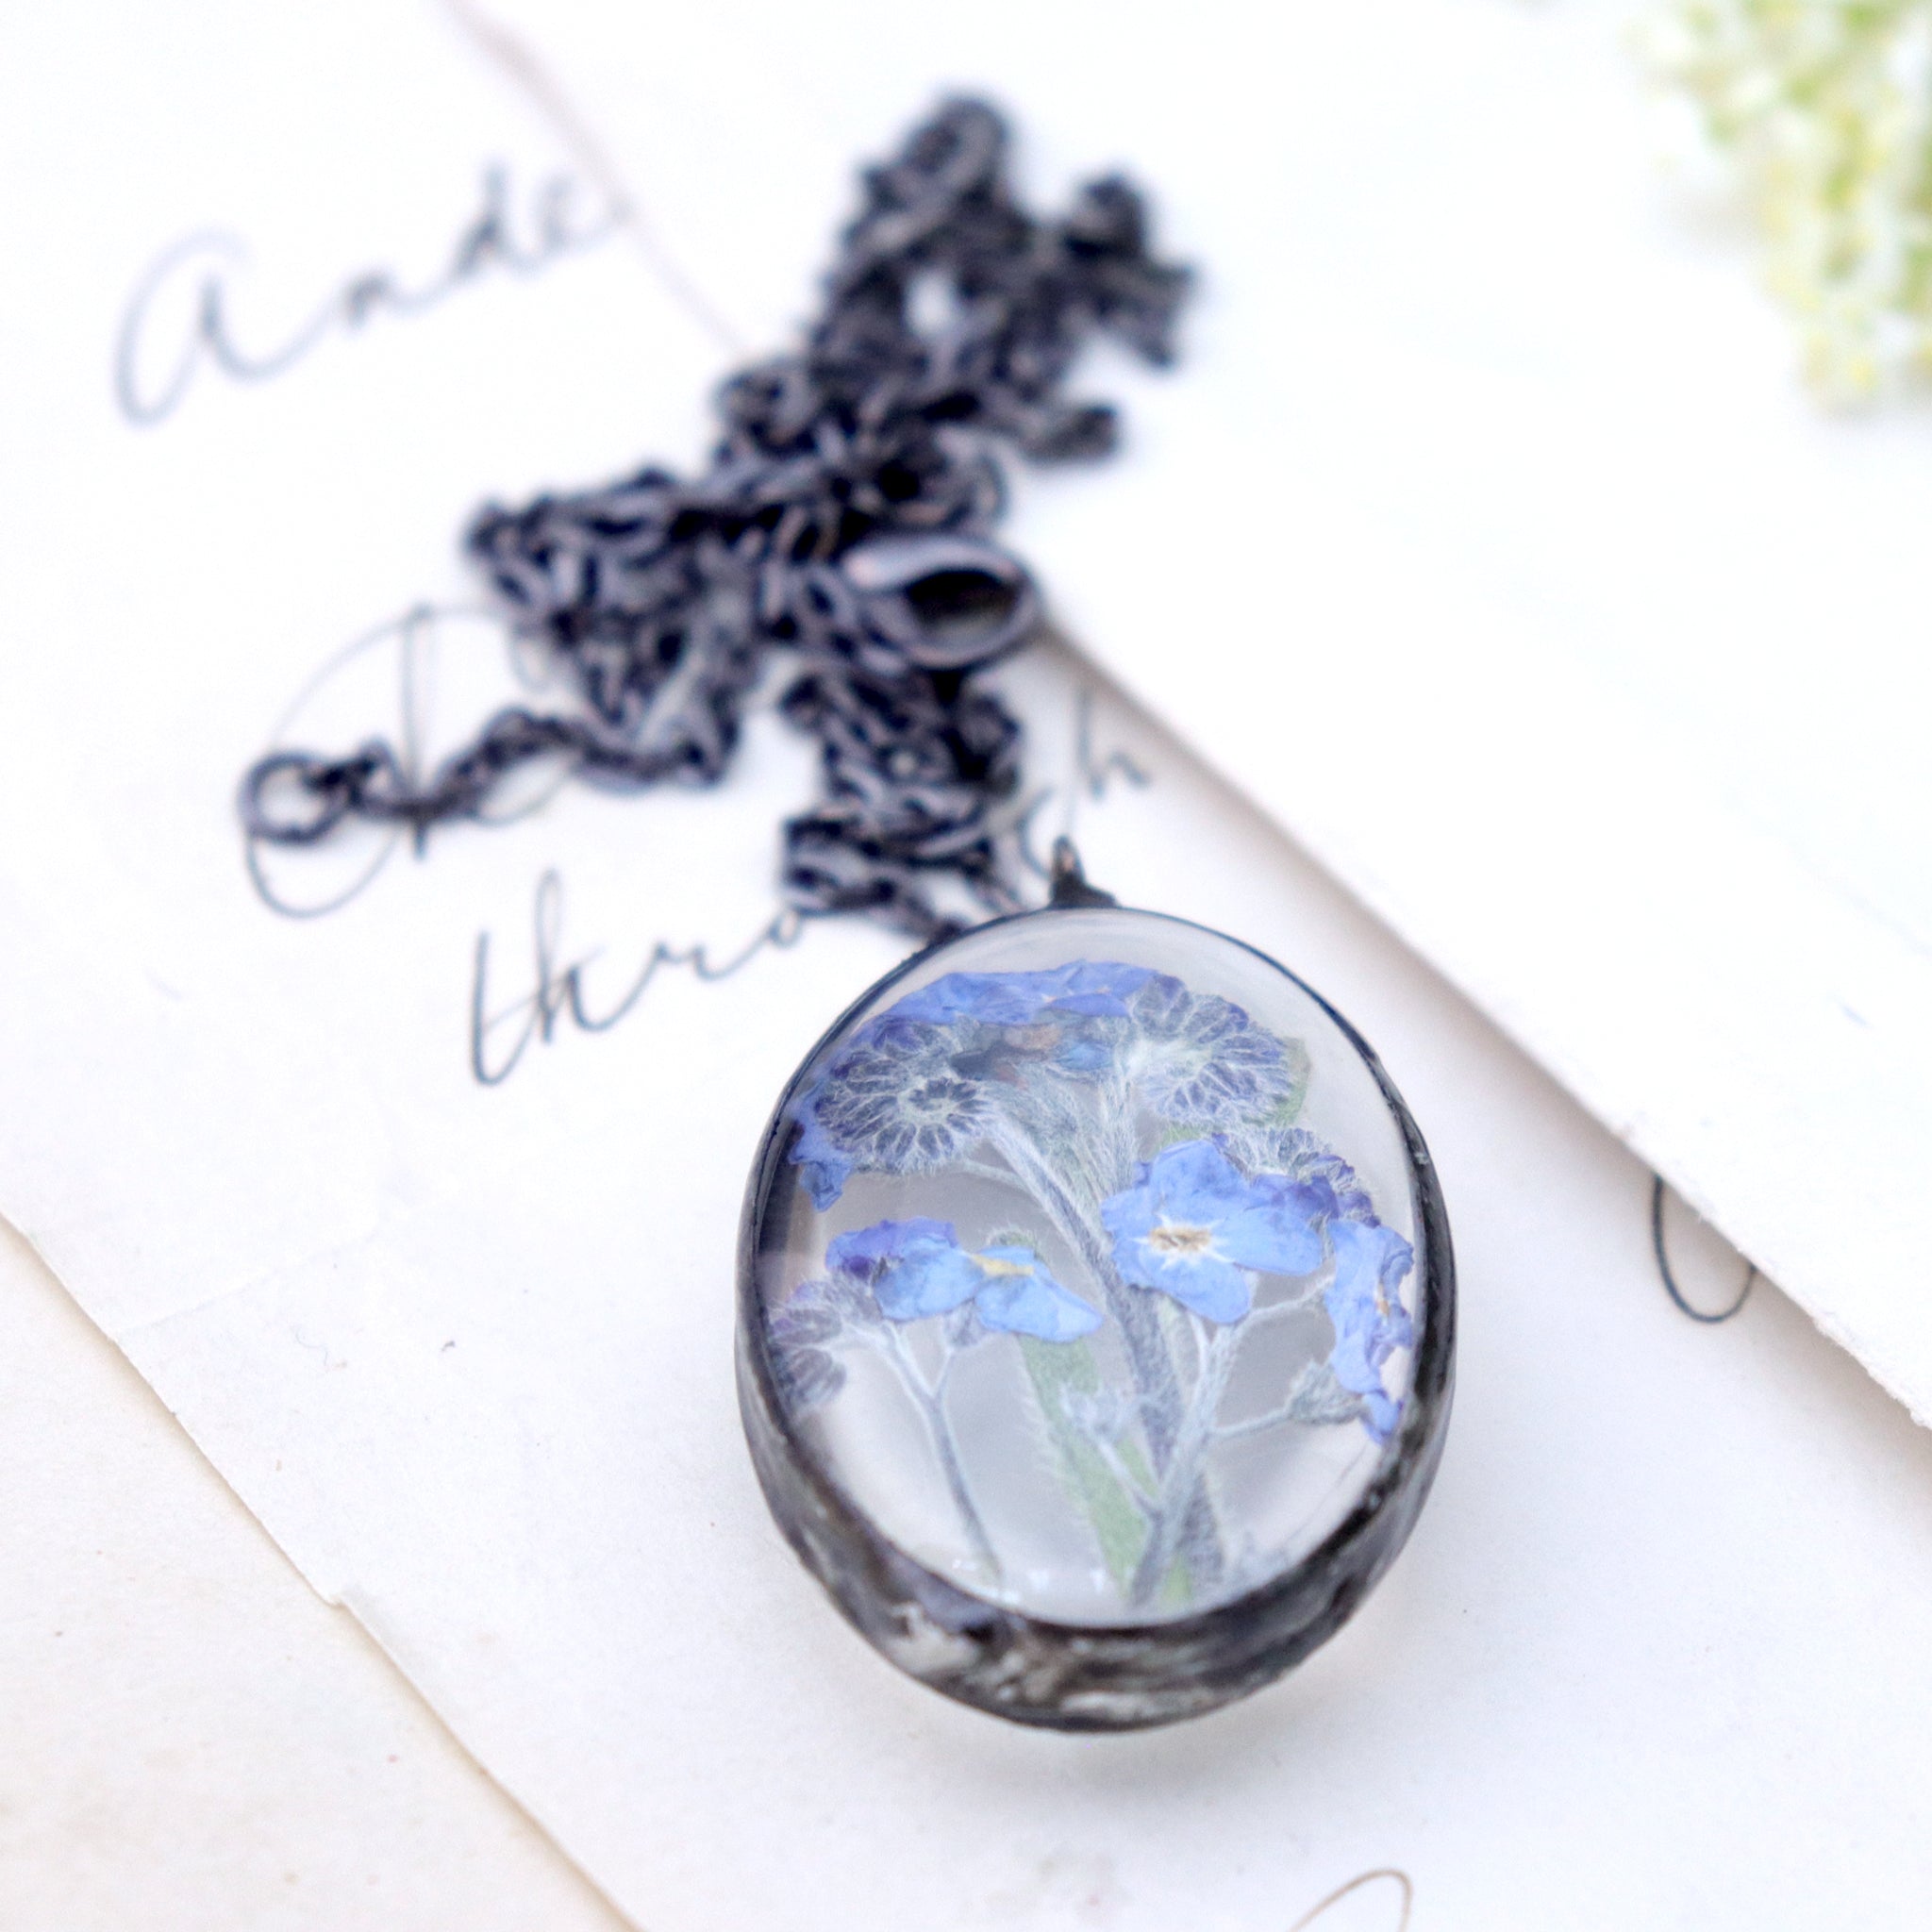 oval Forget-me-not necklaces lying on an old book